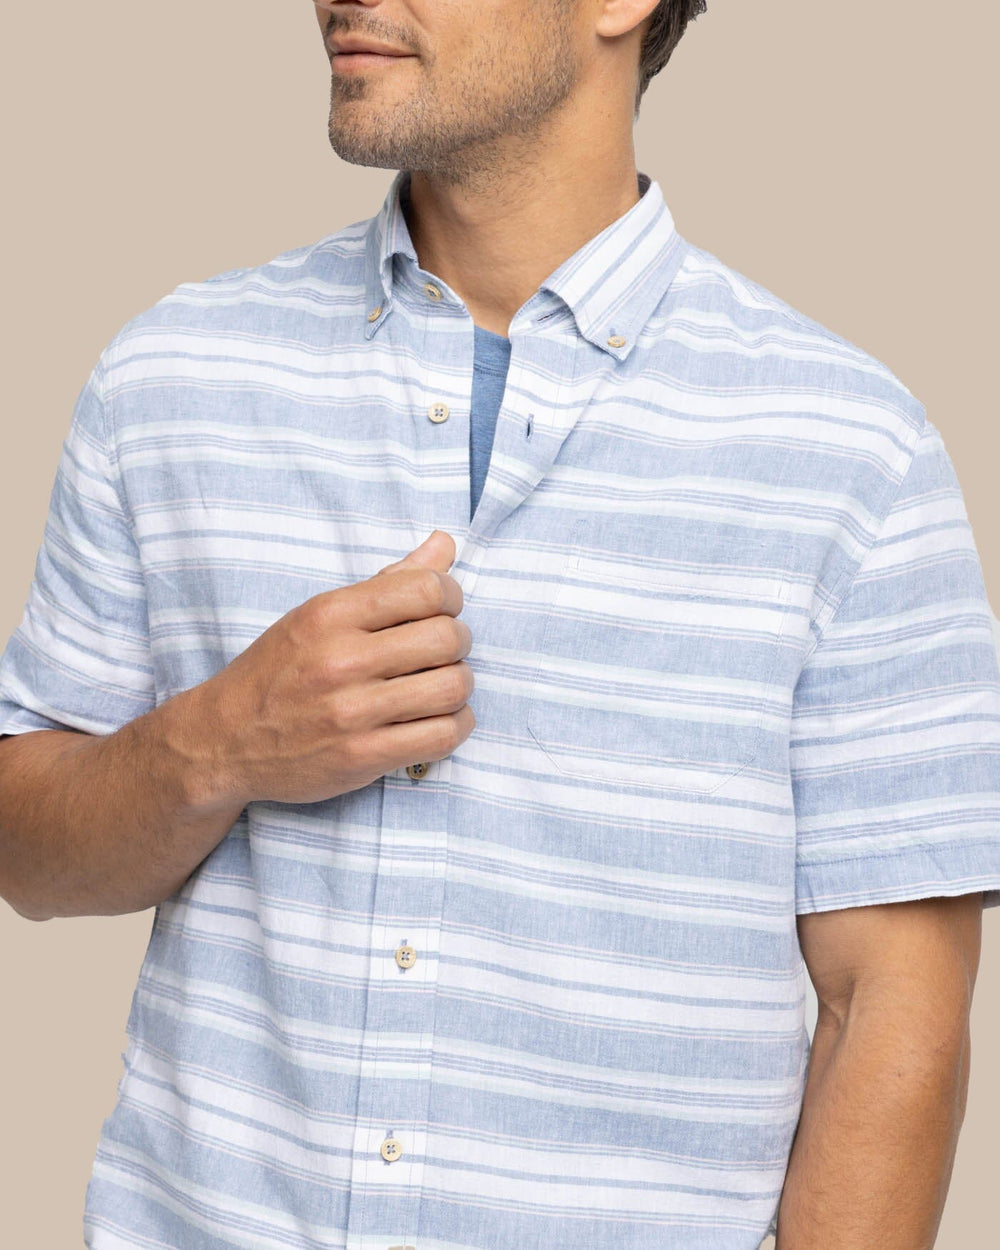 The detail view of the Southern Tide Linen Rayon Timmonsok Stripe Short Sleeve Sport Shirt by Southern Tide - Coronet Blue